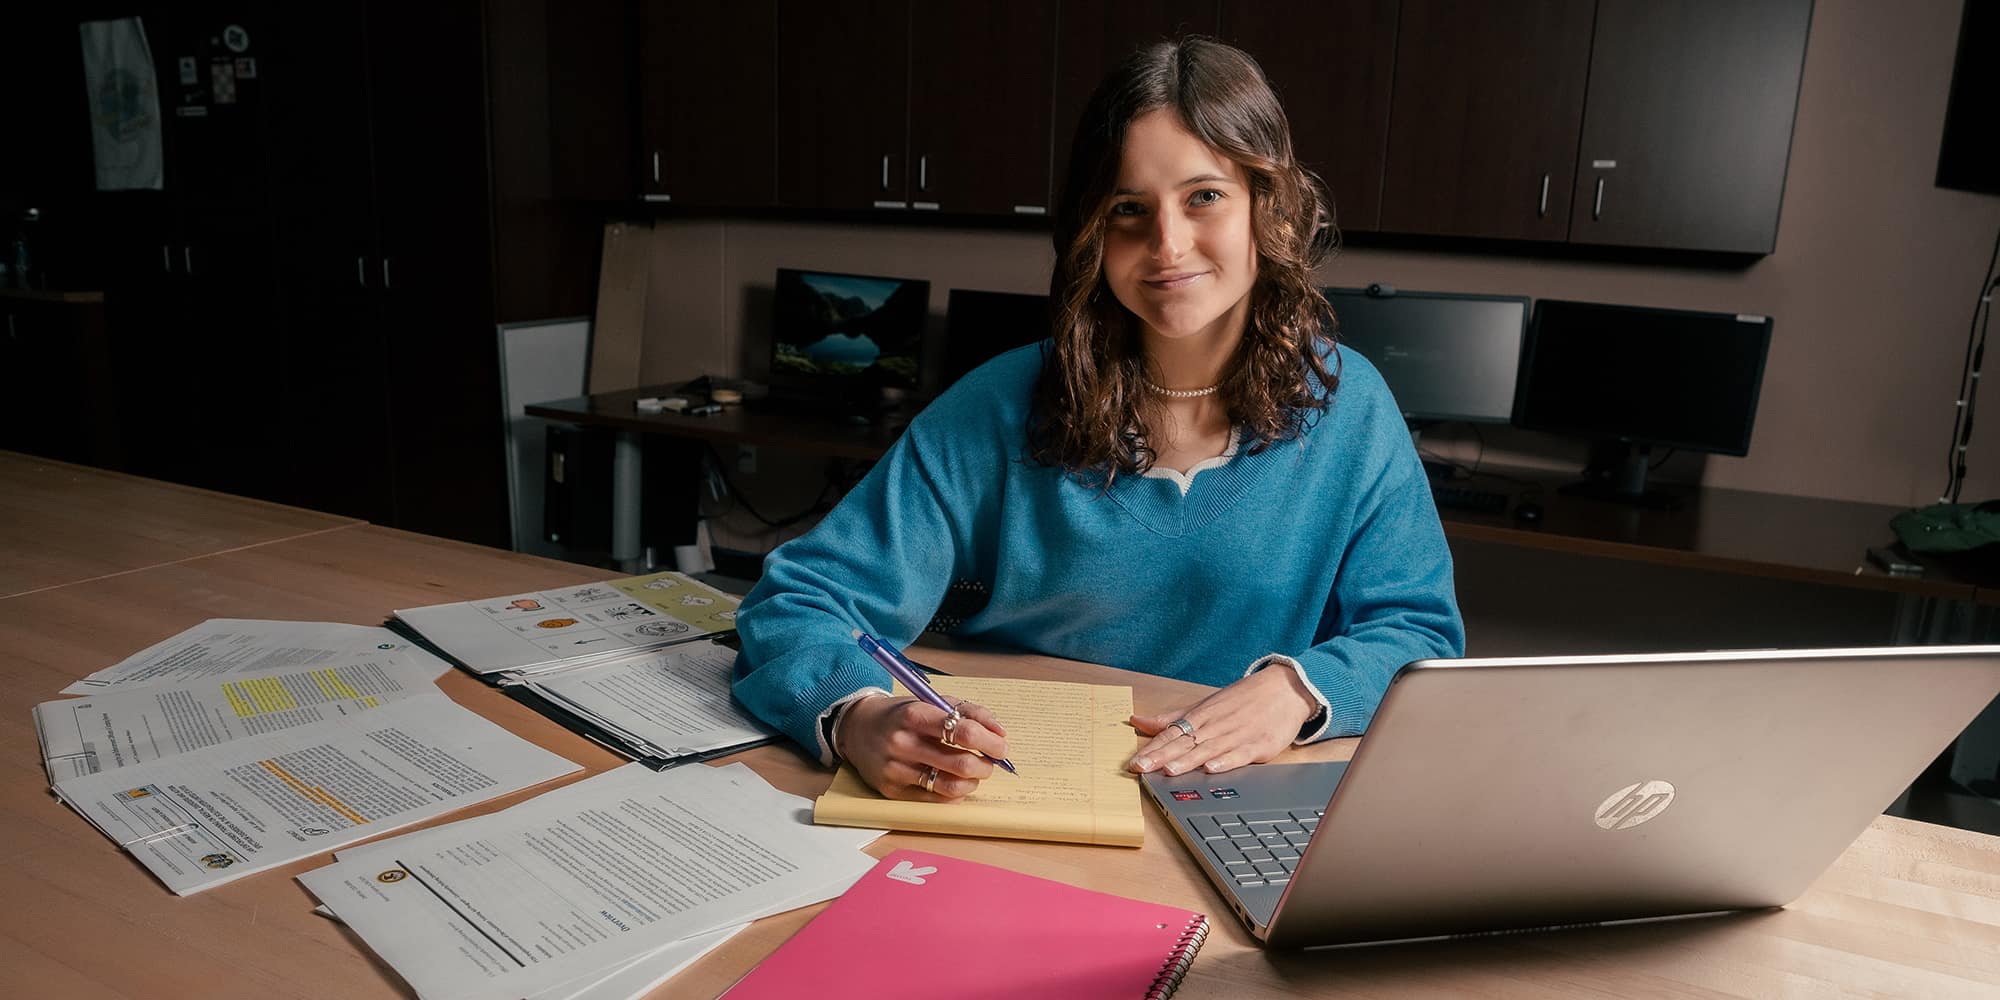 Alexandra Houston, wearing a blue sweater and pearl necklace, sits at a table in a classroom with a laptop, notepad and printed journal articles.